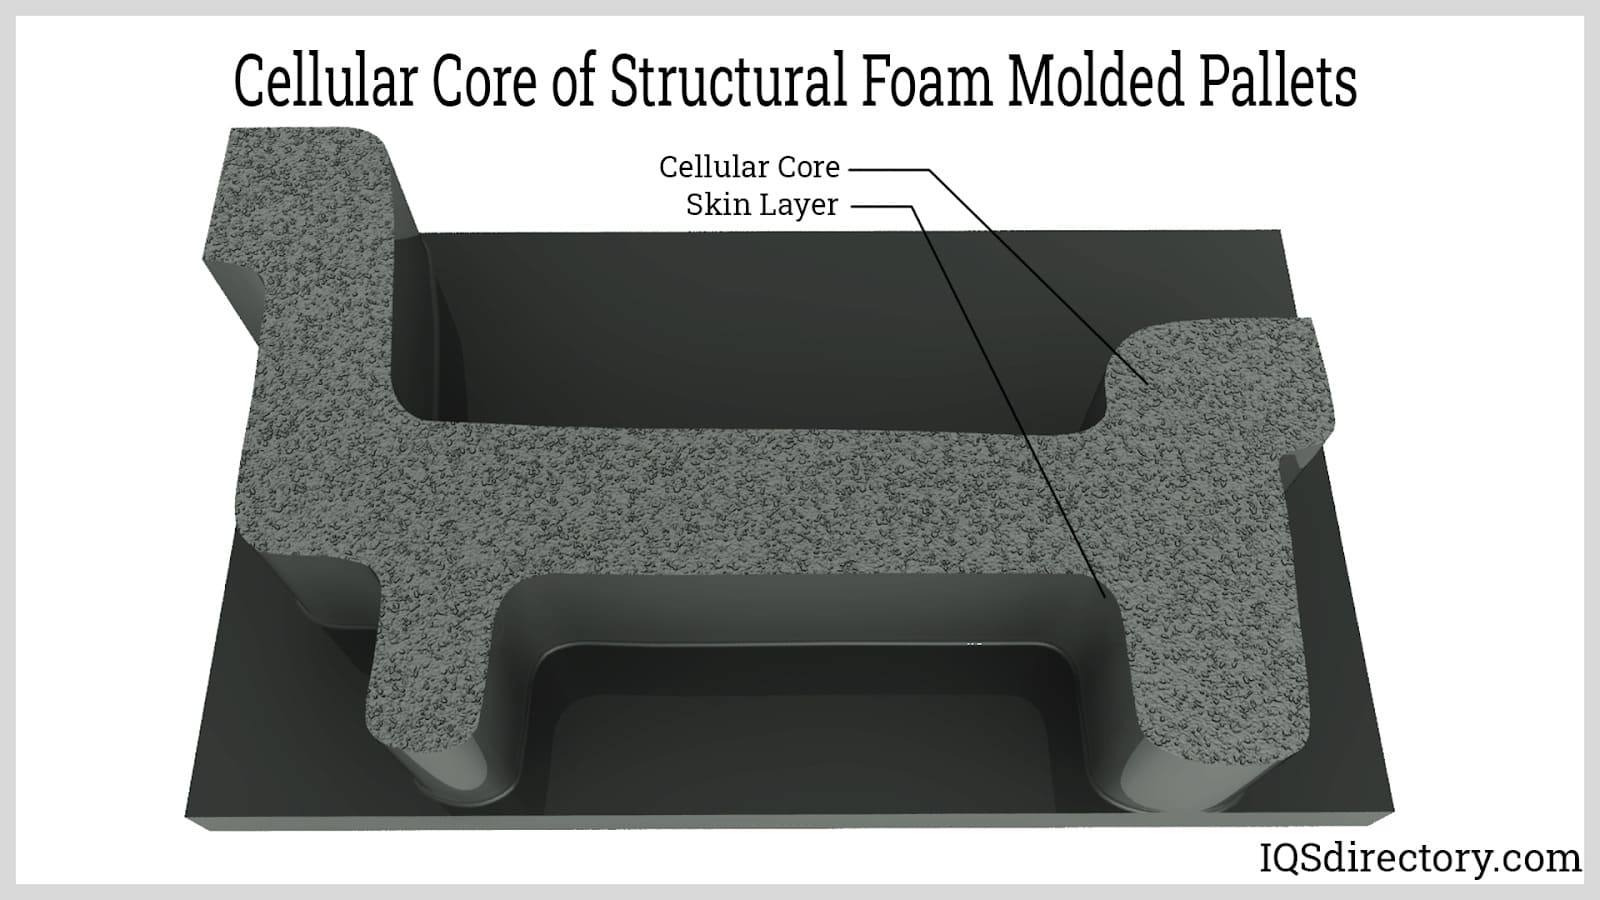 Cellular Core of Structural Foam Molded Pallets